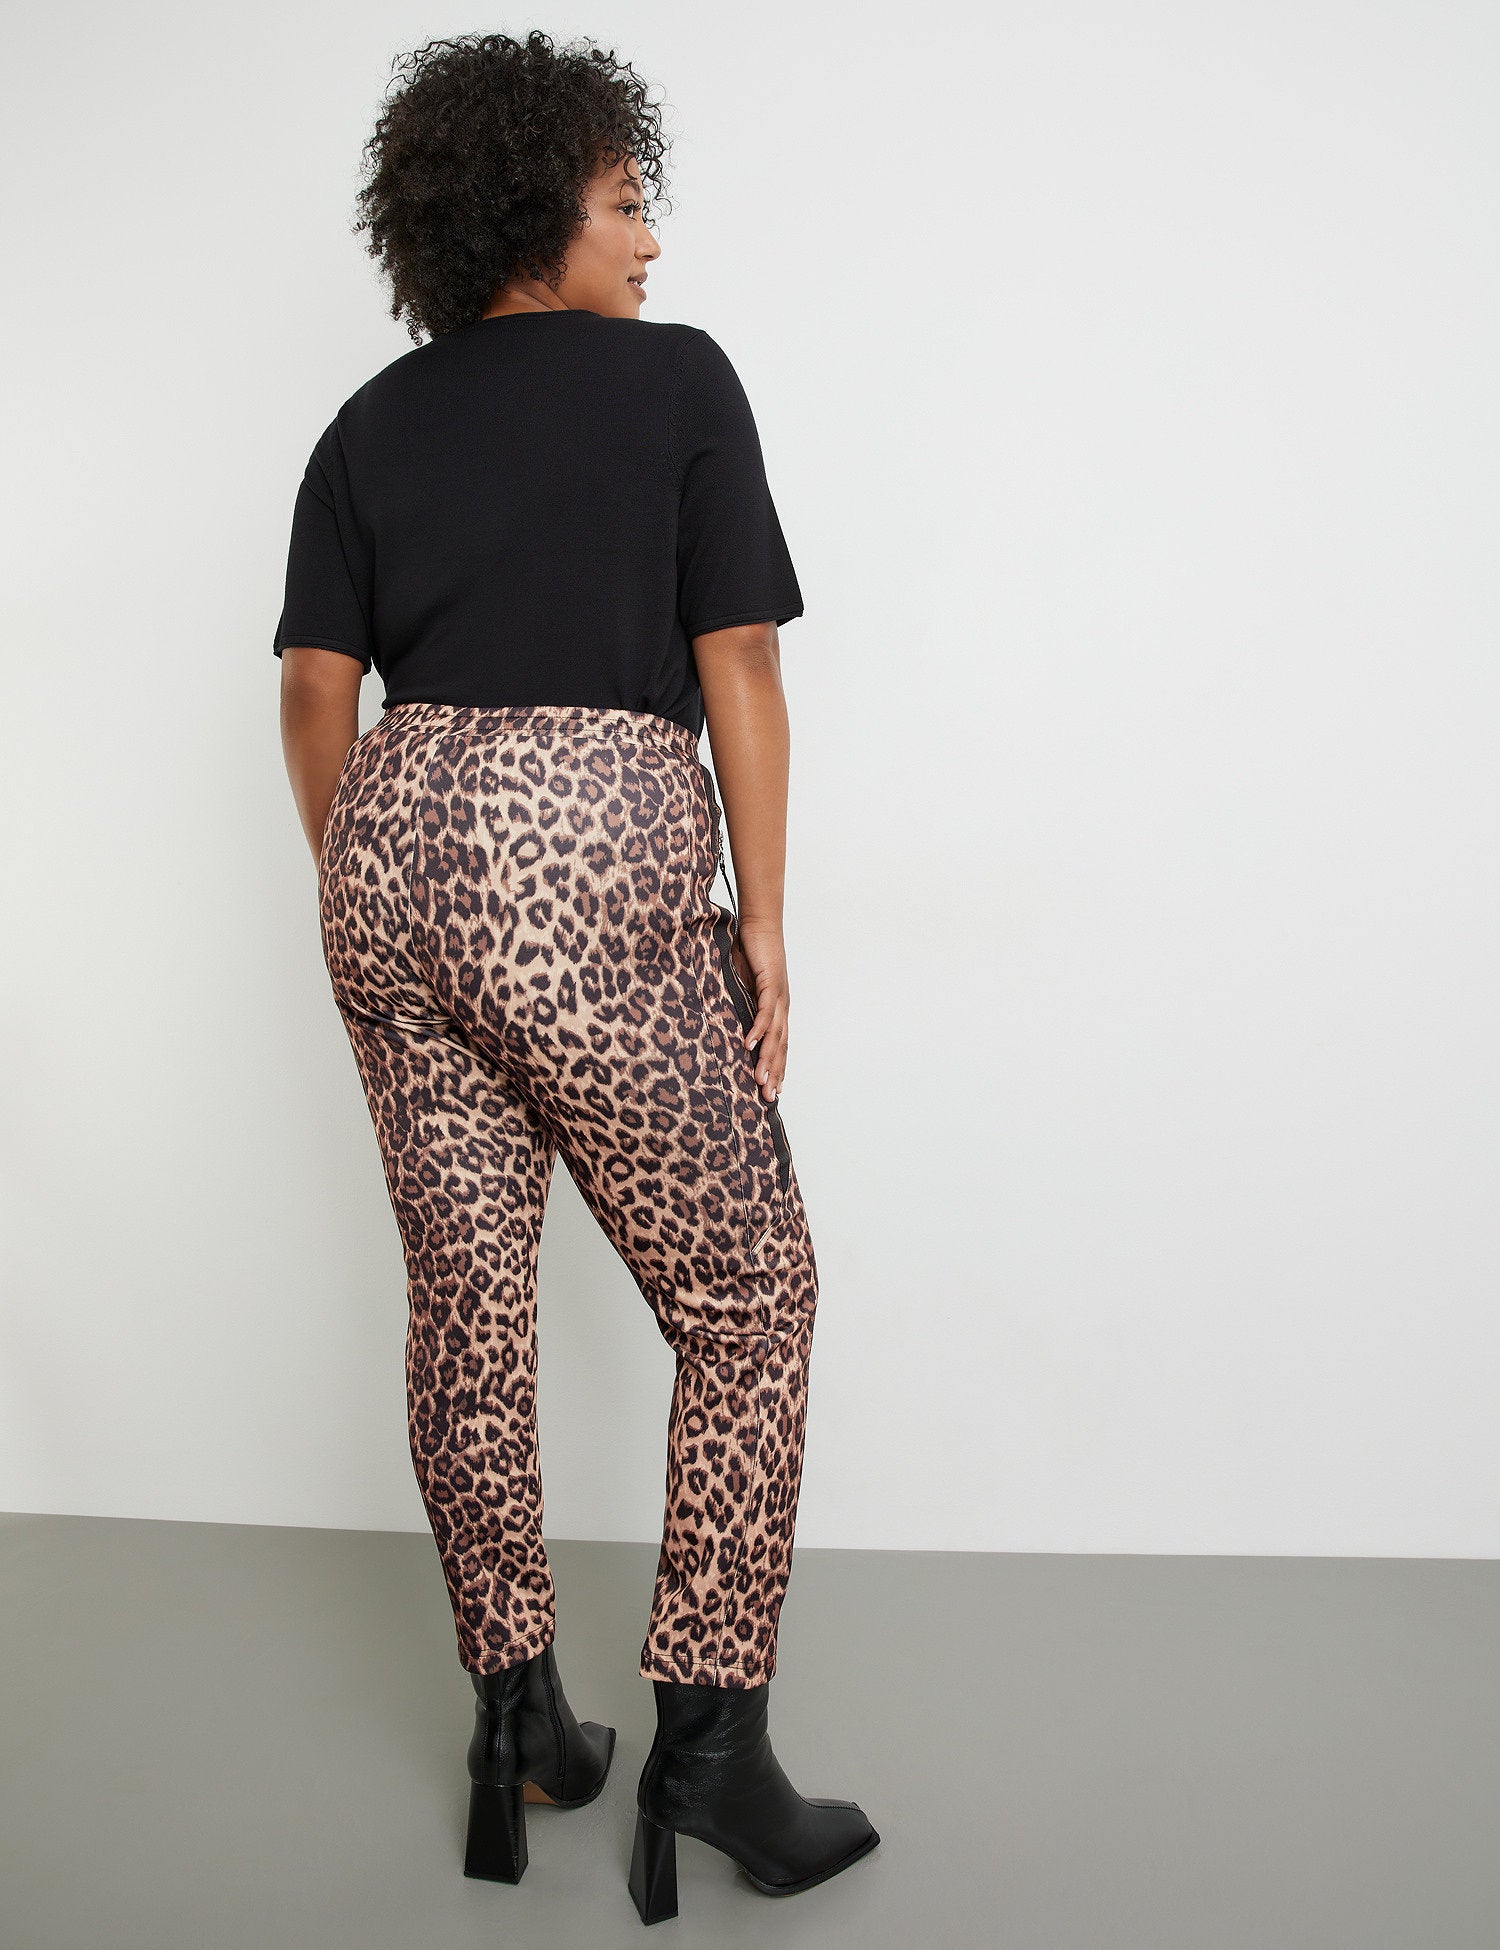 Tracksuit Bottoms With A Leopard Print Pattern_321203-26329_1102_06